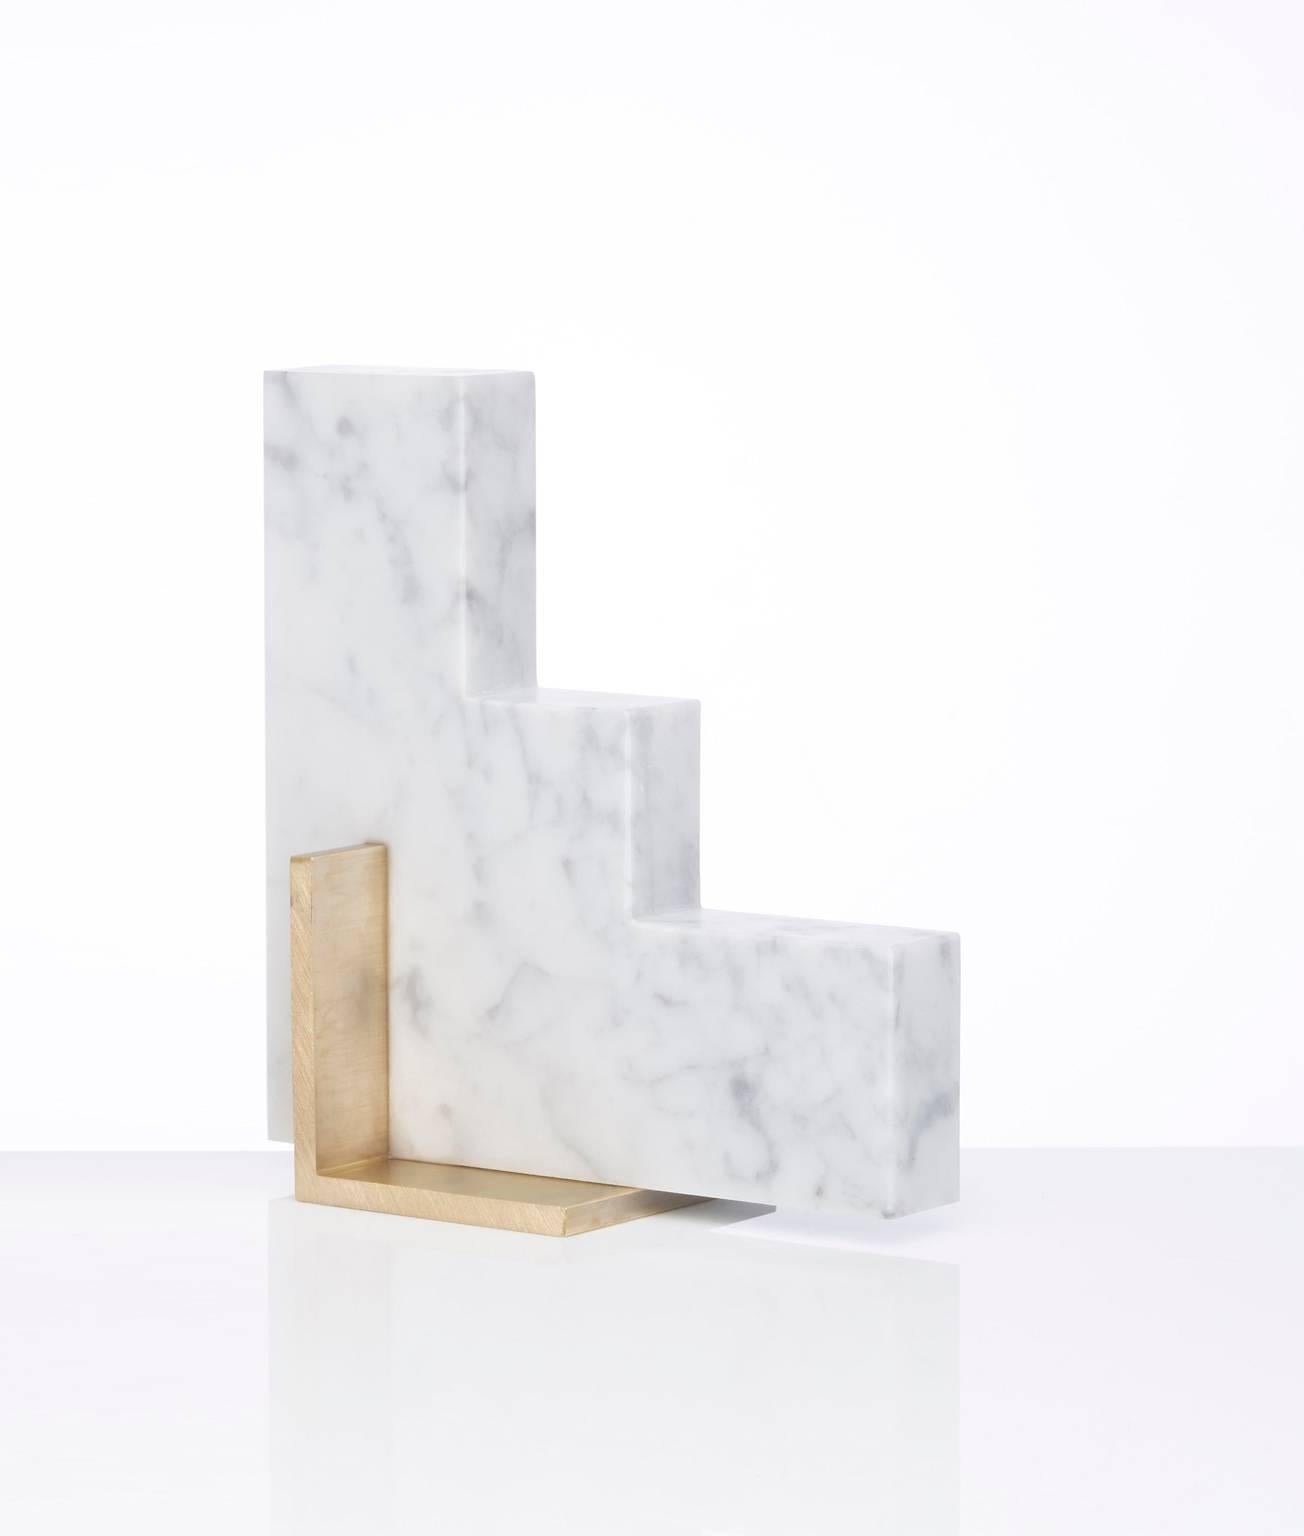 Meet Steppy; one half of the odd couple bookends set which are now available to buy individually. You can now mix and match colors and shapes.
Steppy is shown here in Carrara marble and a brushed brass base.
The marble is cut into a geometric